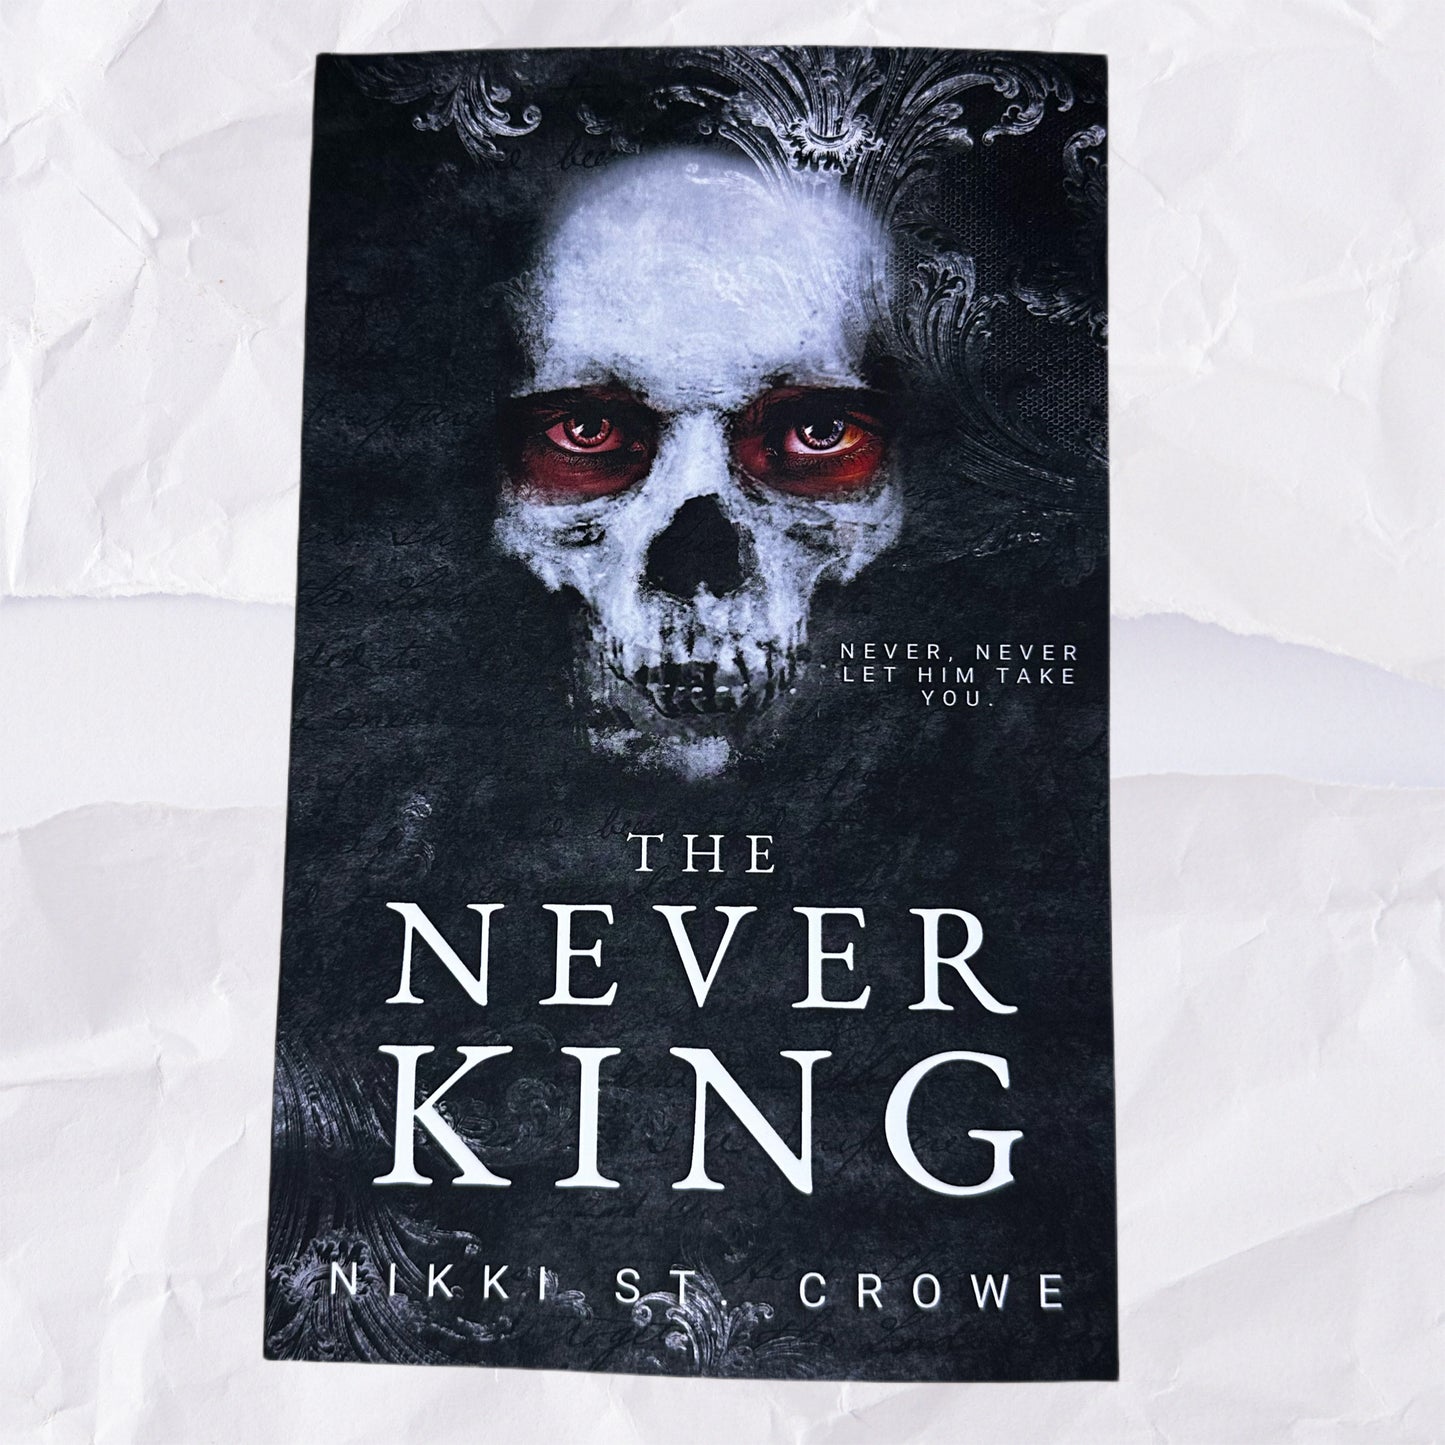 The Never King (Vicious Lost Boys #1) by Nikki St. Crowe